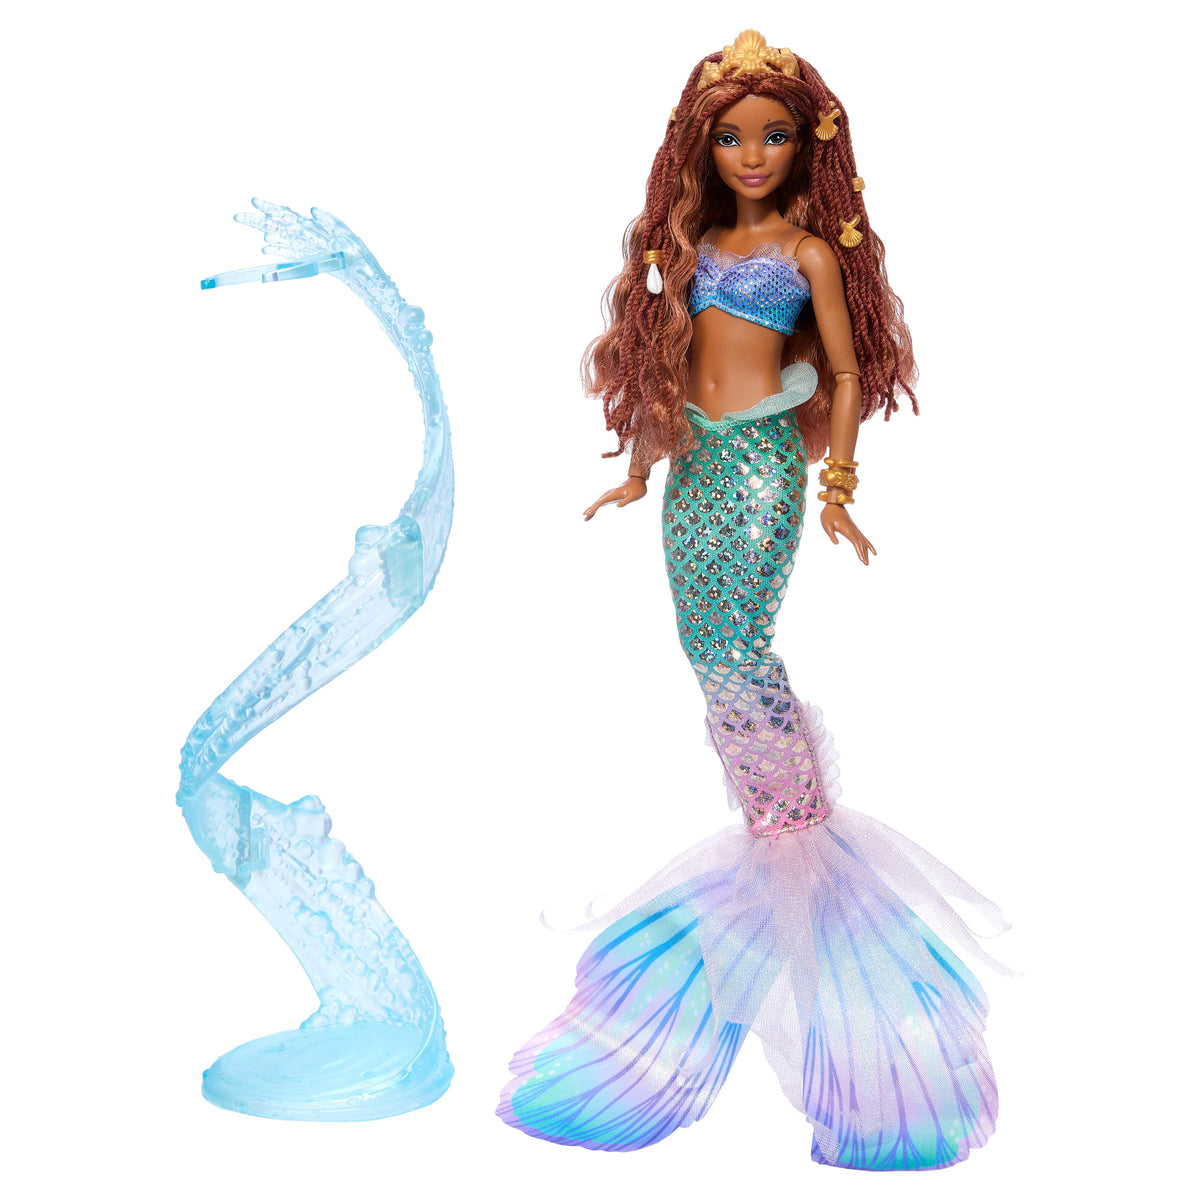 Disney The Little Mermaid Deluxe Mermaid Ariel Doll with Iridescent Tail, Hair Jewelry Beads and Doll Stand for Kids Ages 3+